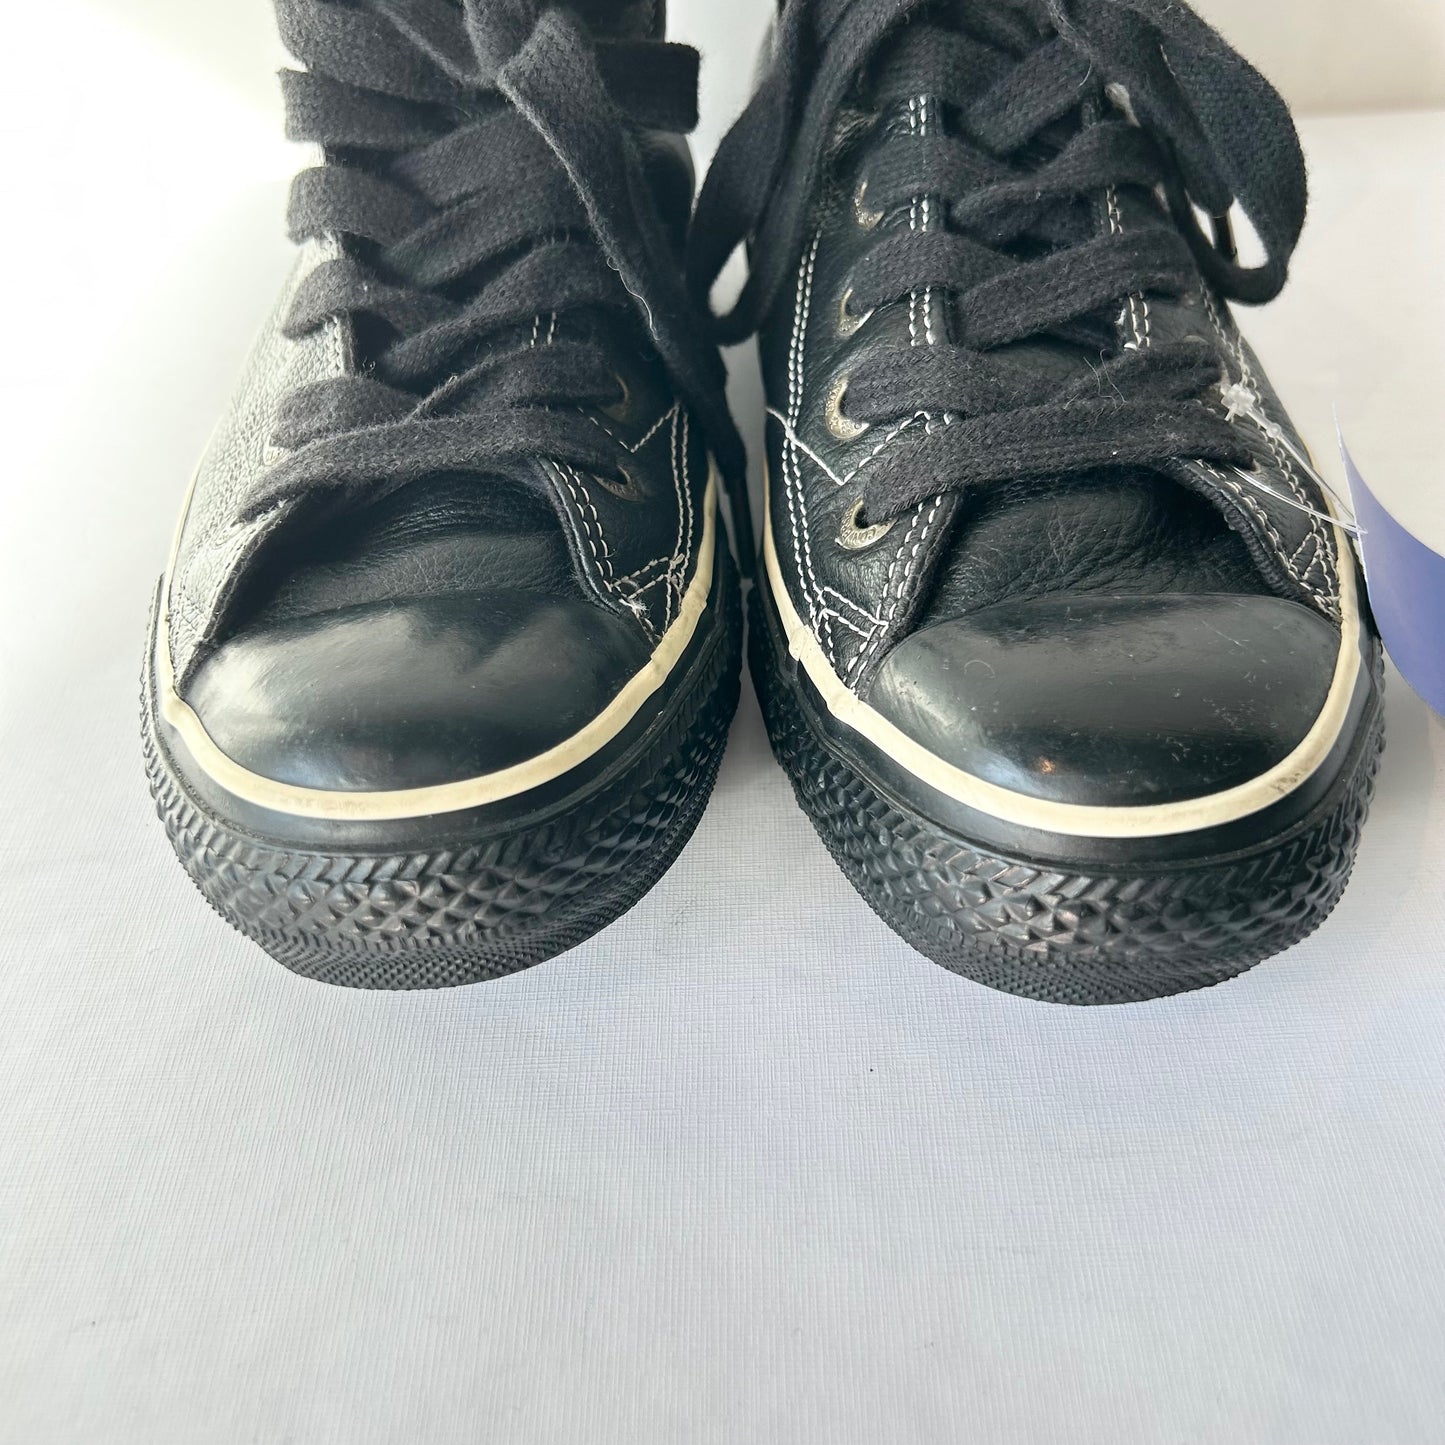 4 Converse All-Star Black Shoes